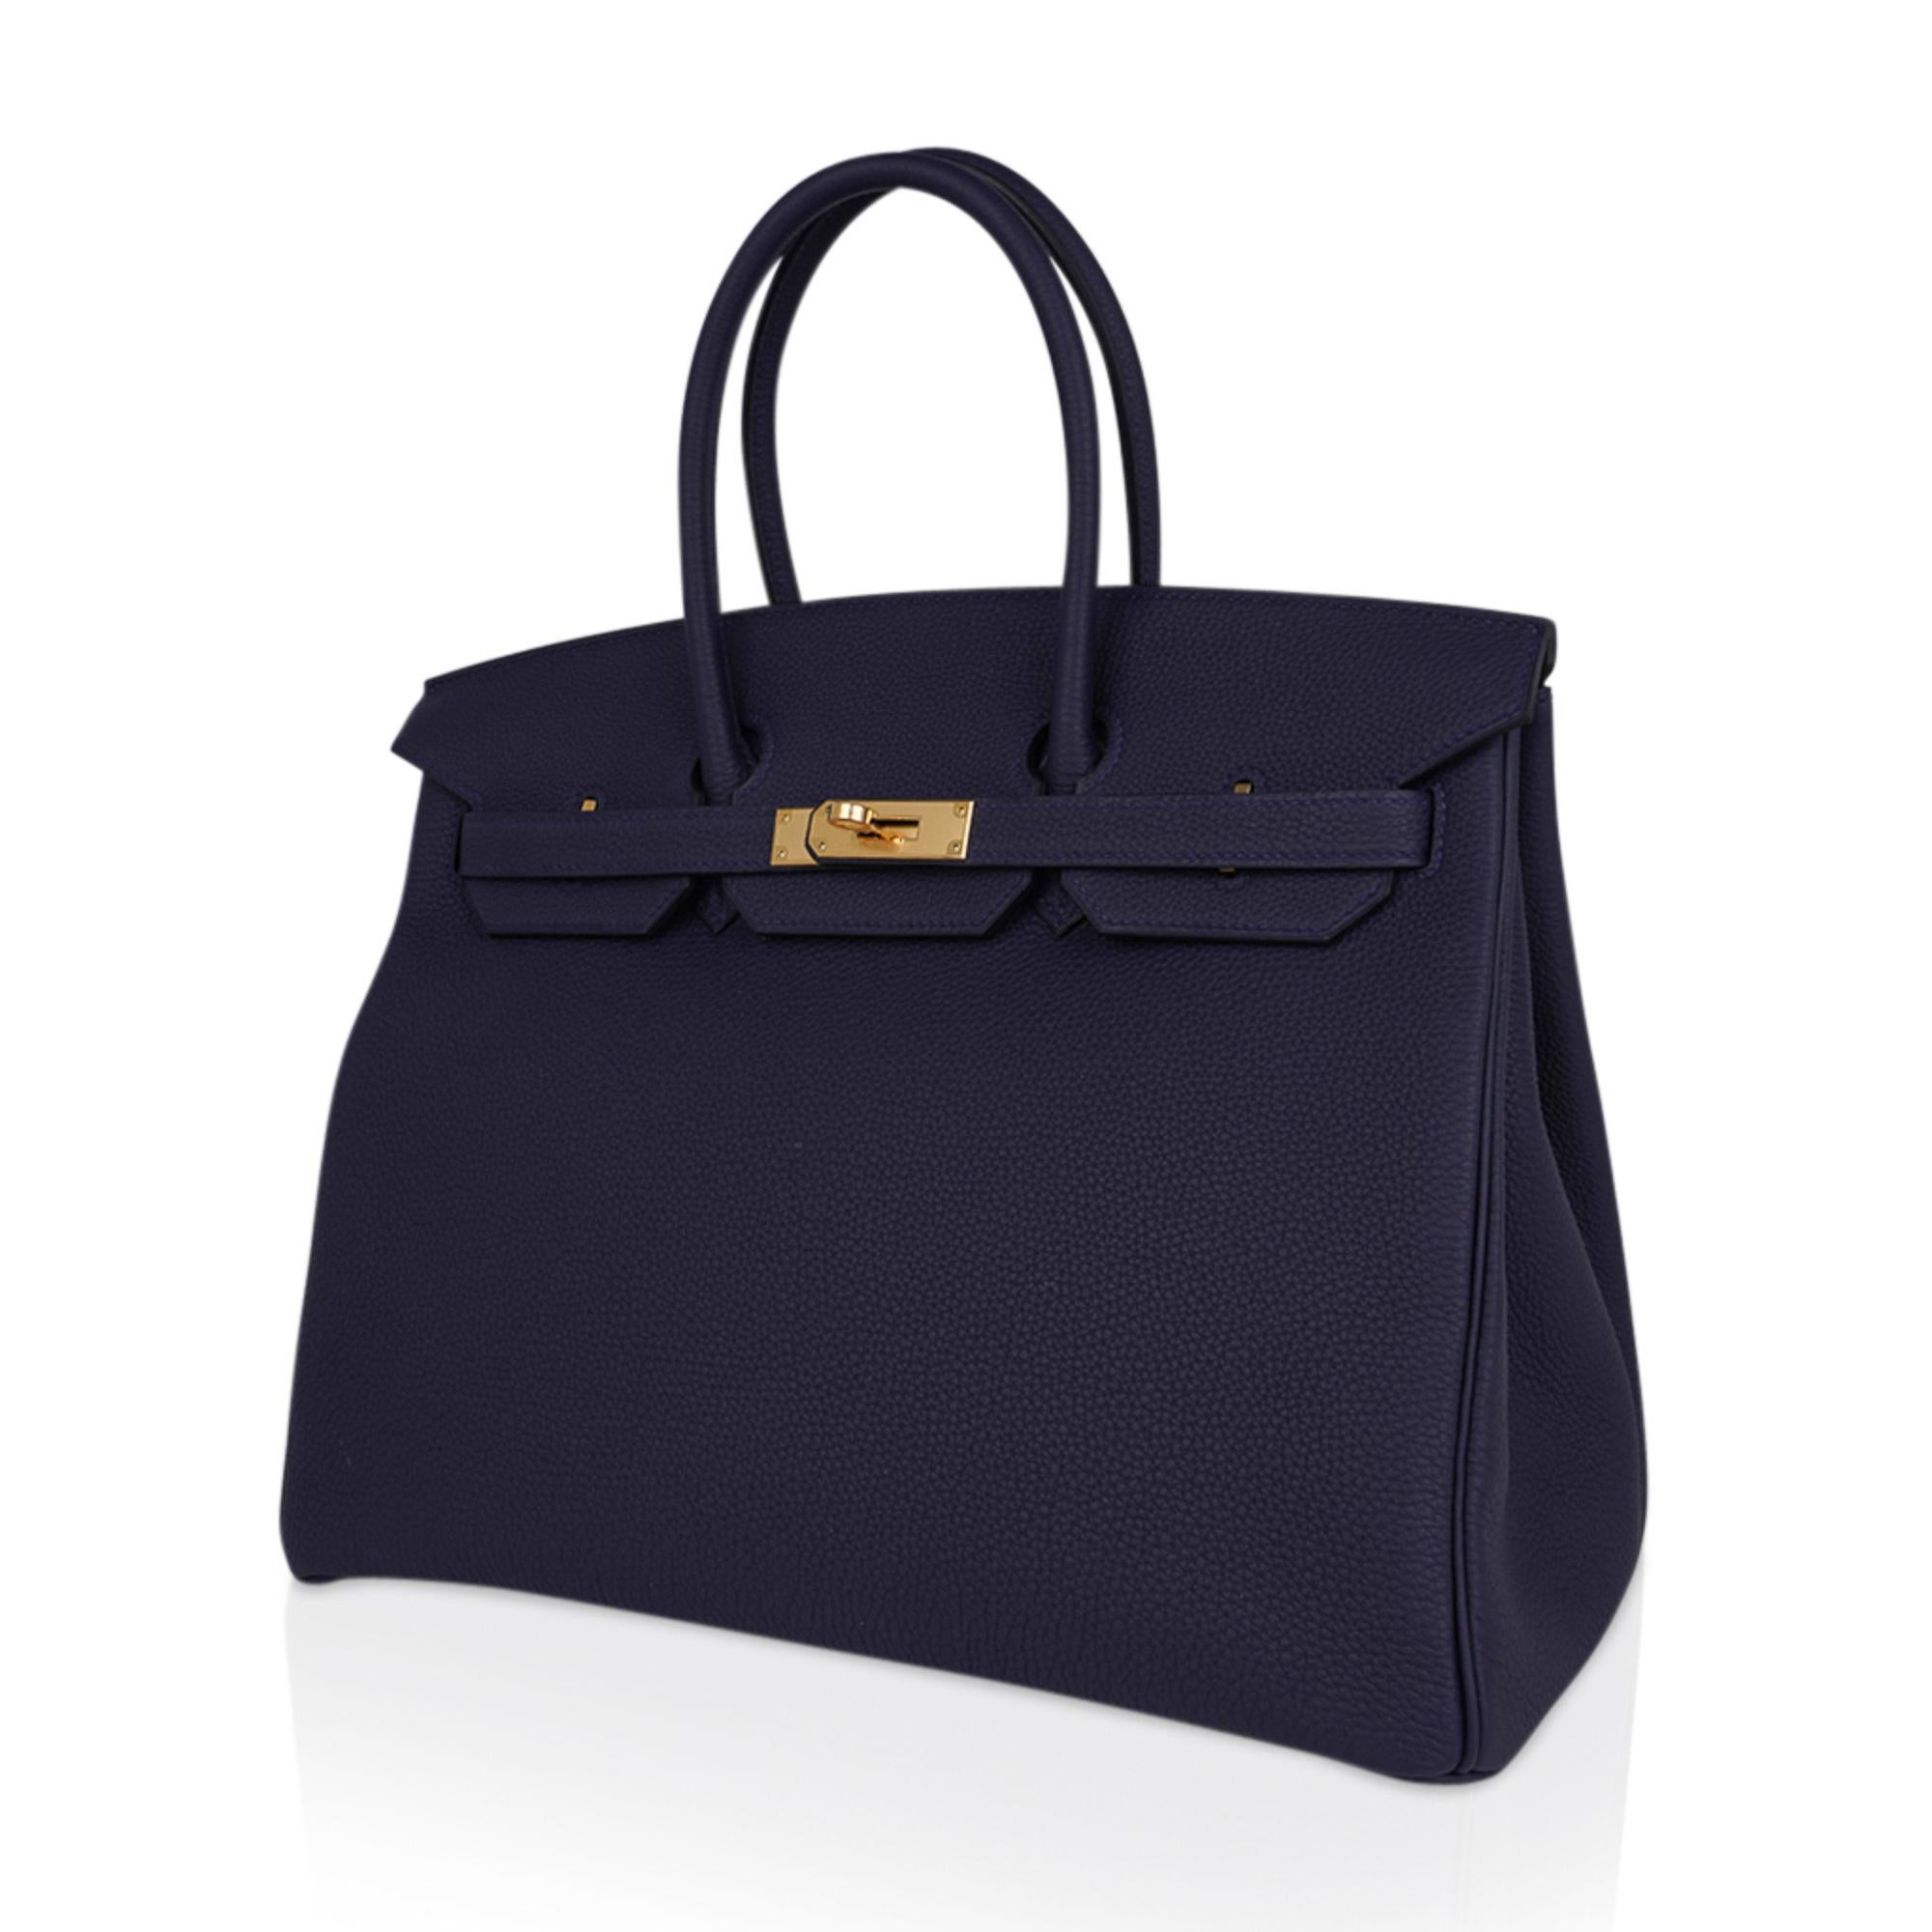 Mightychic offers an Hermes Birkin 35 bag featured in rich deep Bleu Nuit.
This beauty comes in Togo leather with Gold hardware.
Comes with lock, keys, clochette, sleeper, raincoat and signature Hermes box with ribbon.
New or Never Worn.
final